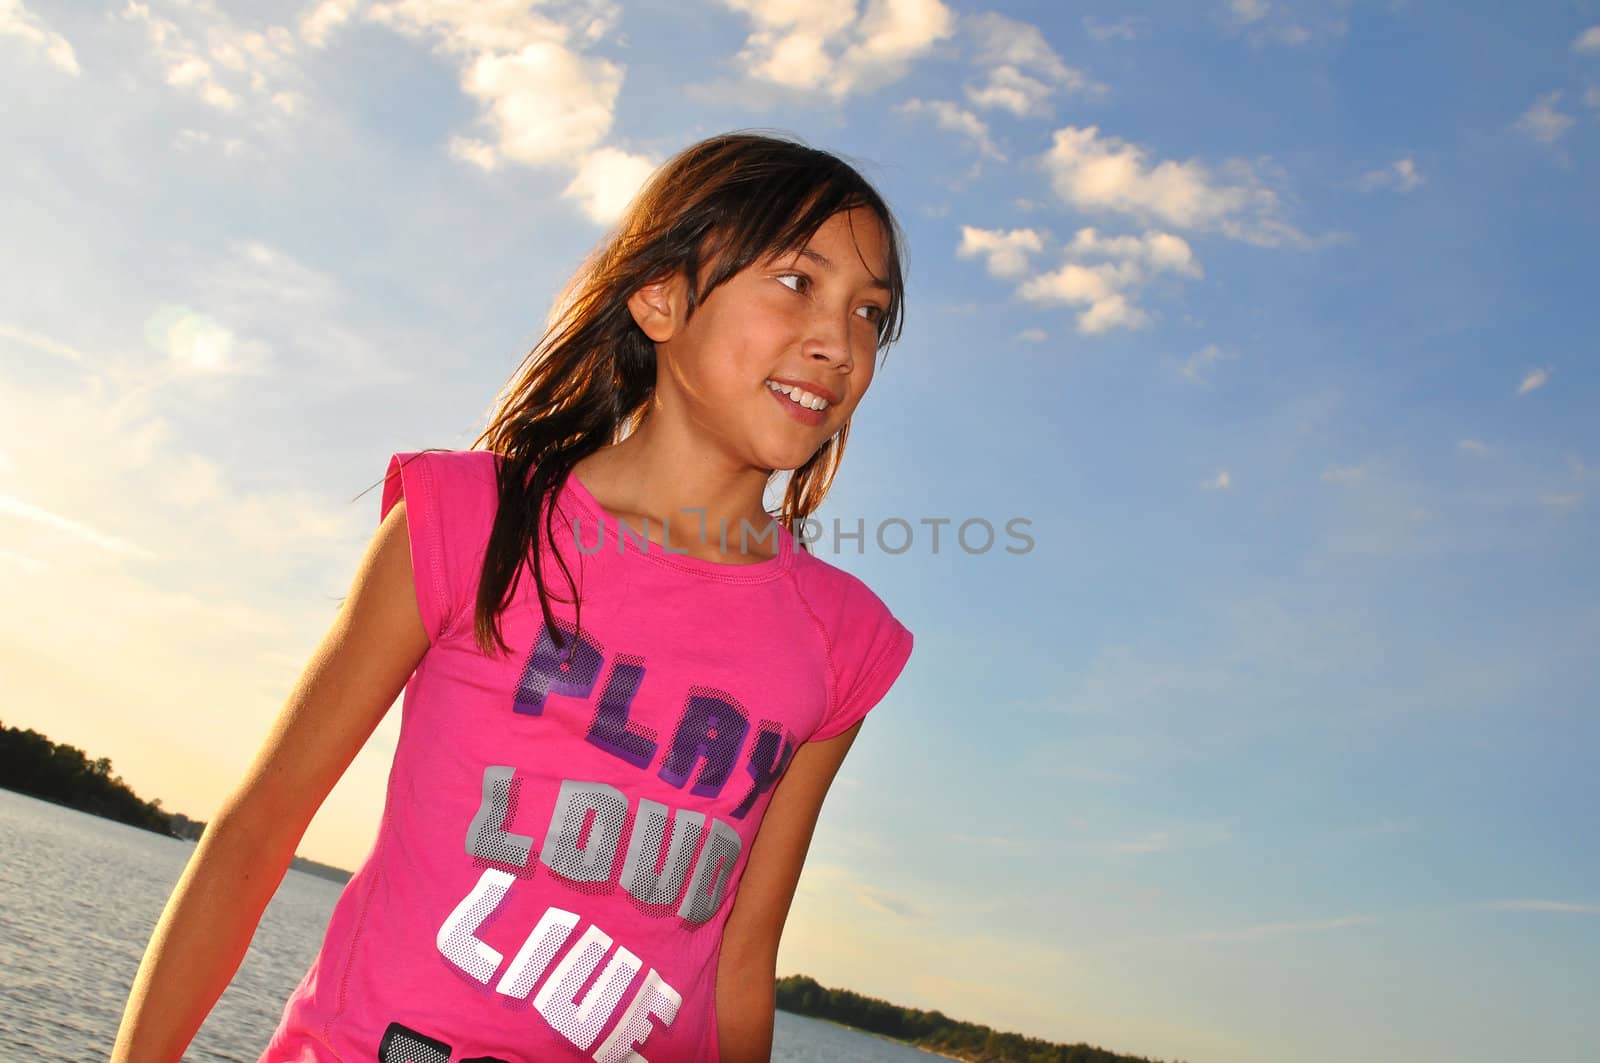 A smiling young girl during summer with sea and sky as background. Photo taken in the archipelago of Stockholm,Sweden.